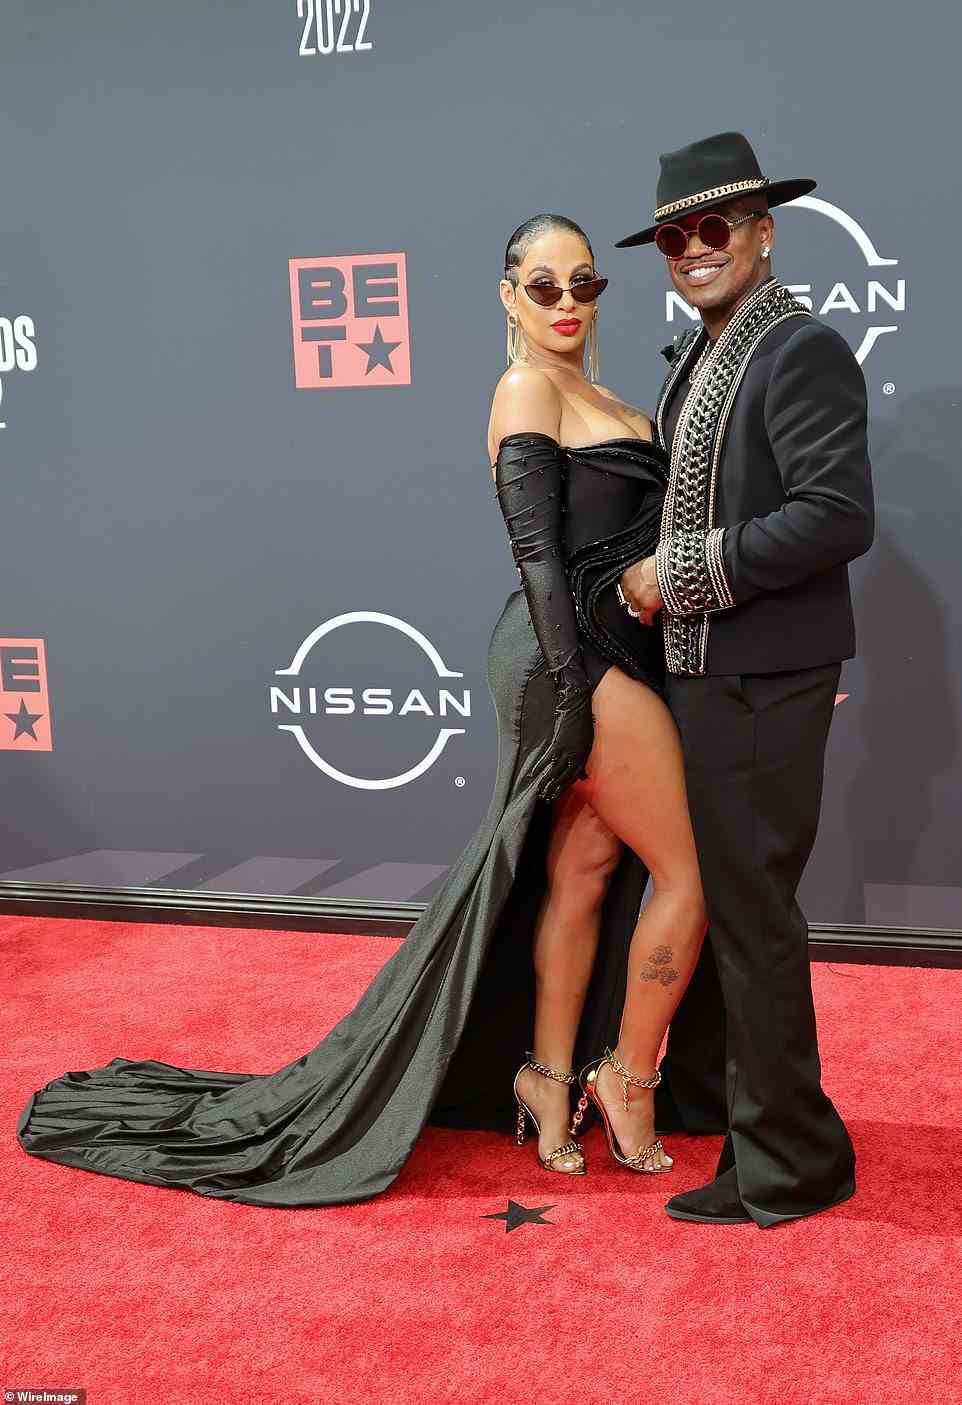 Stylish pair: Singer Ne-Yo, 42, and his wife Crystal, 36, made a stylish pair on the red carpet